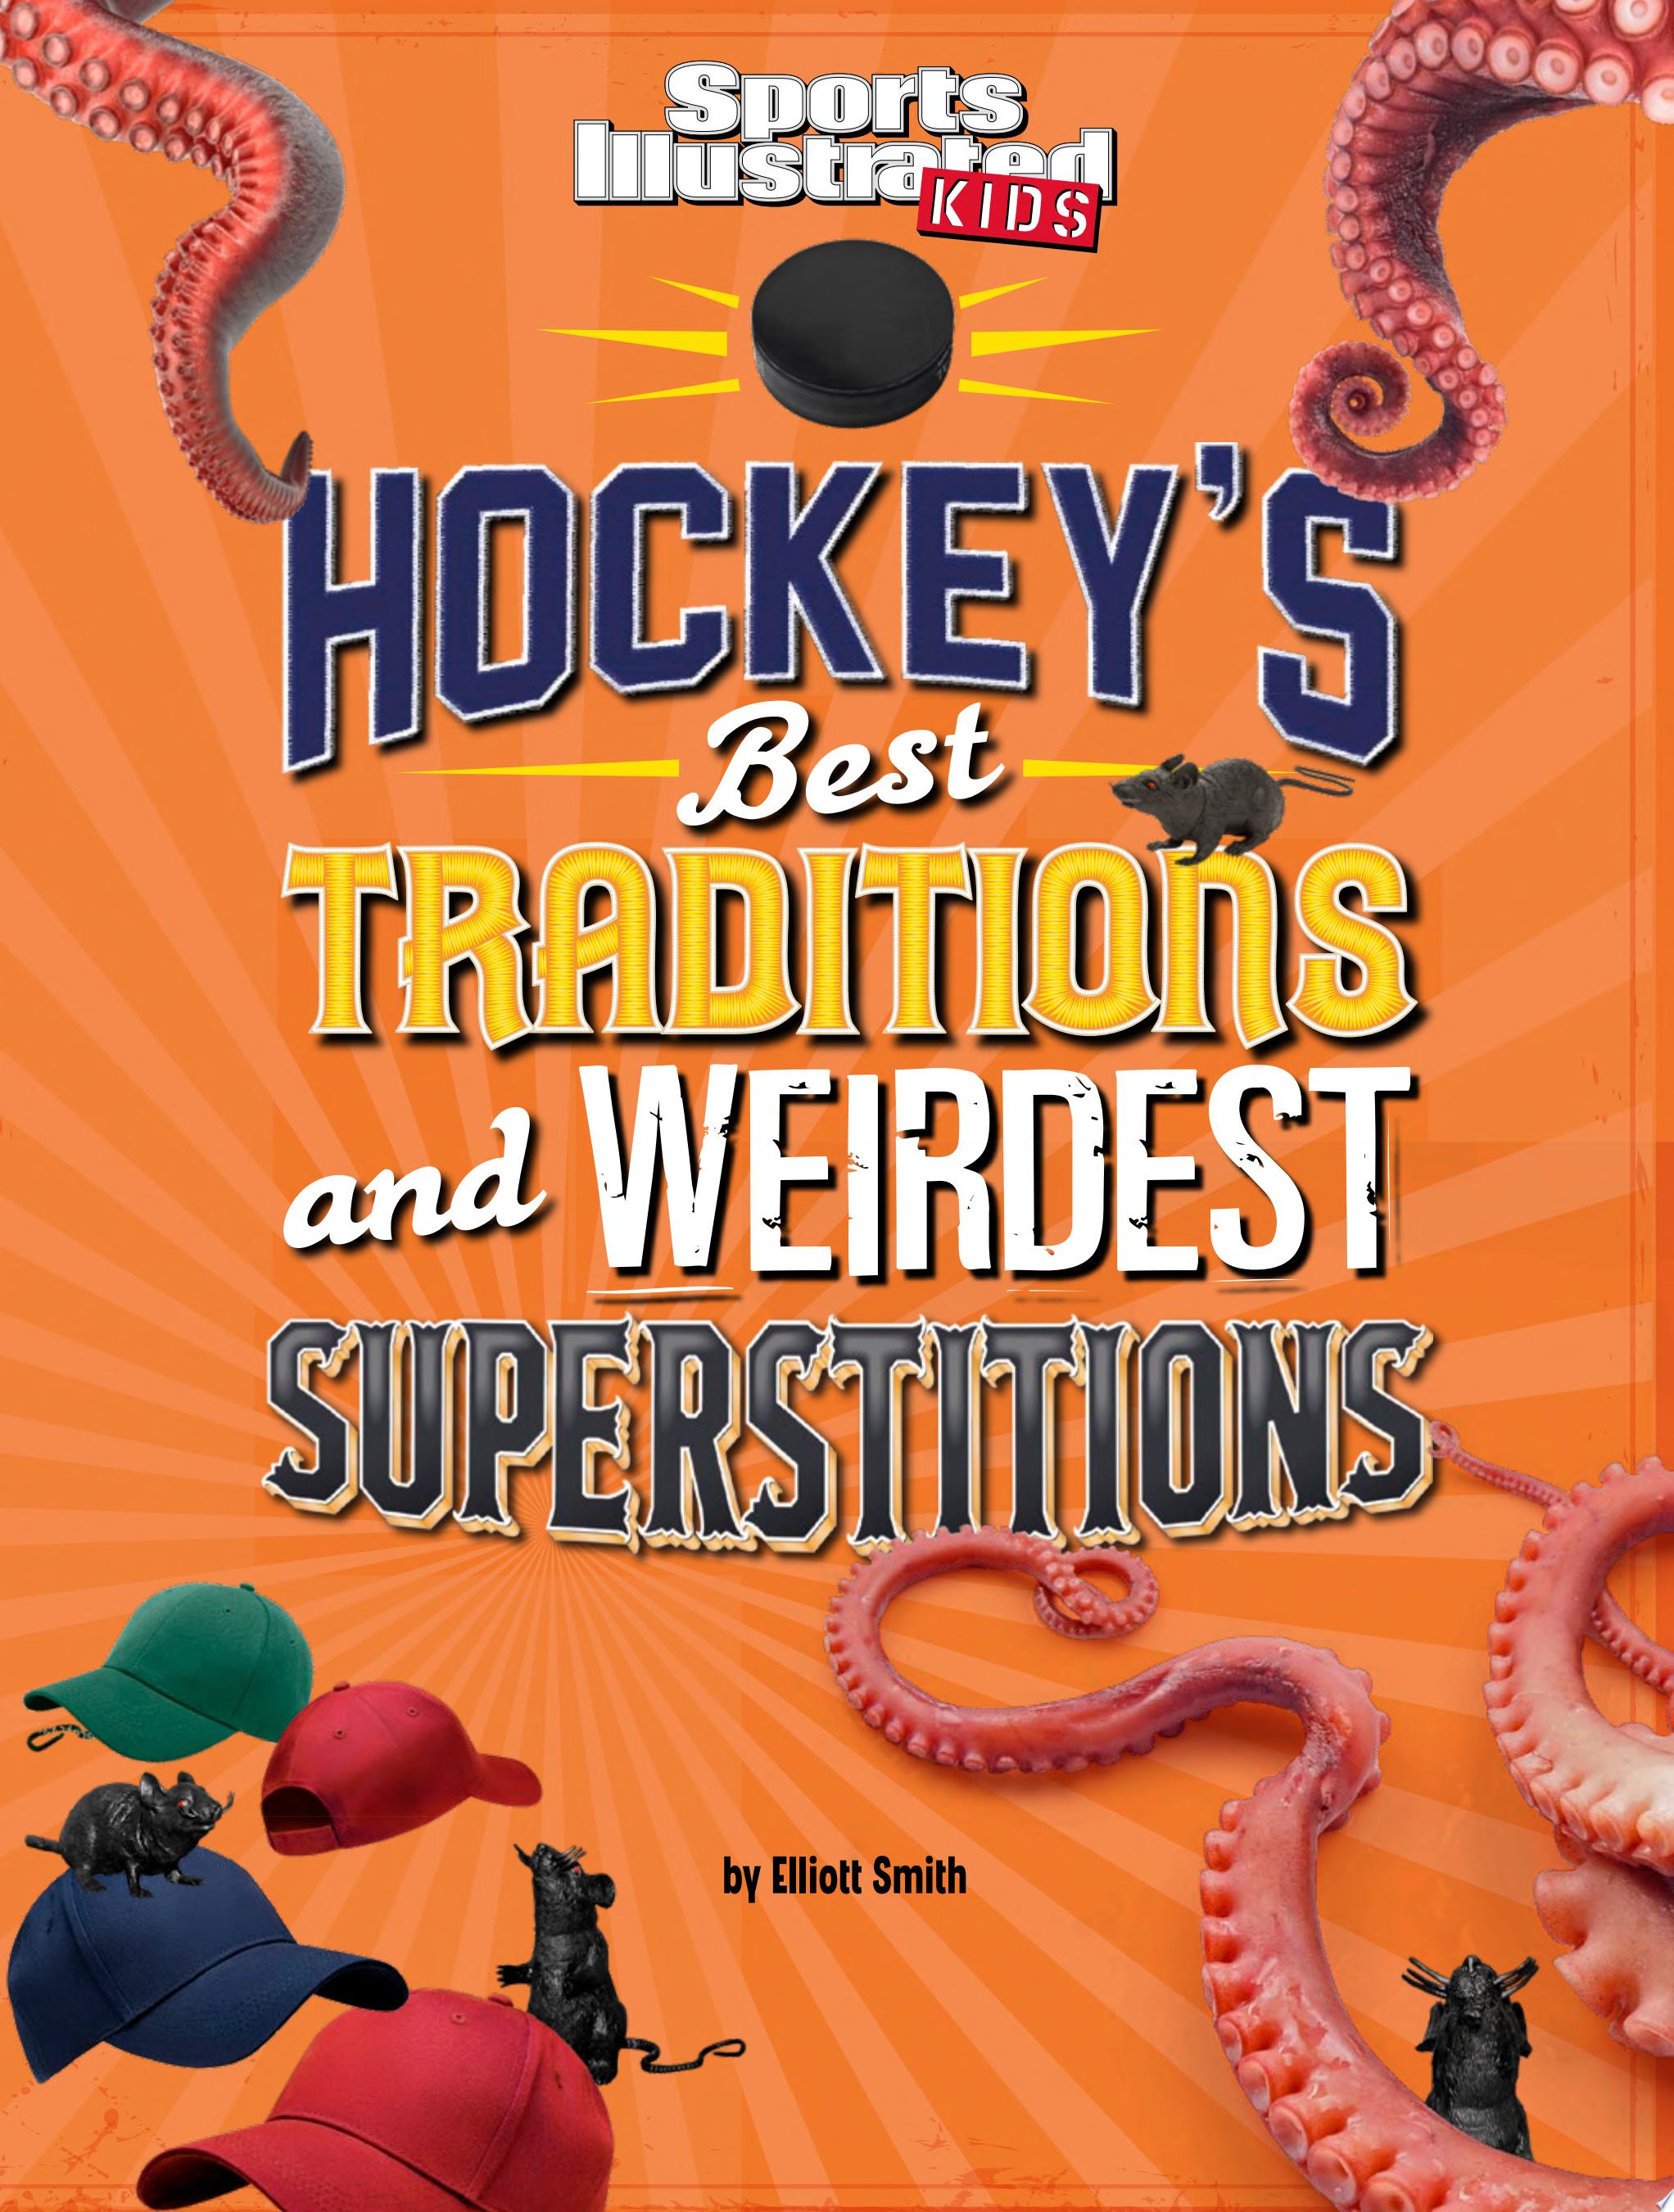 Image for "Hockey's Best Traditions and Weirdest Superstitions"